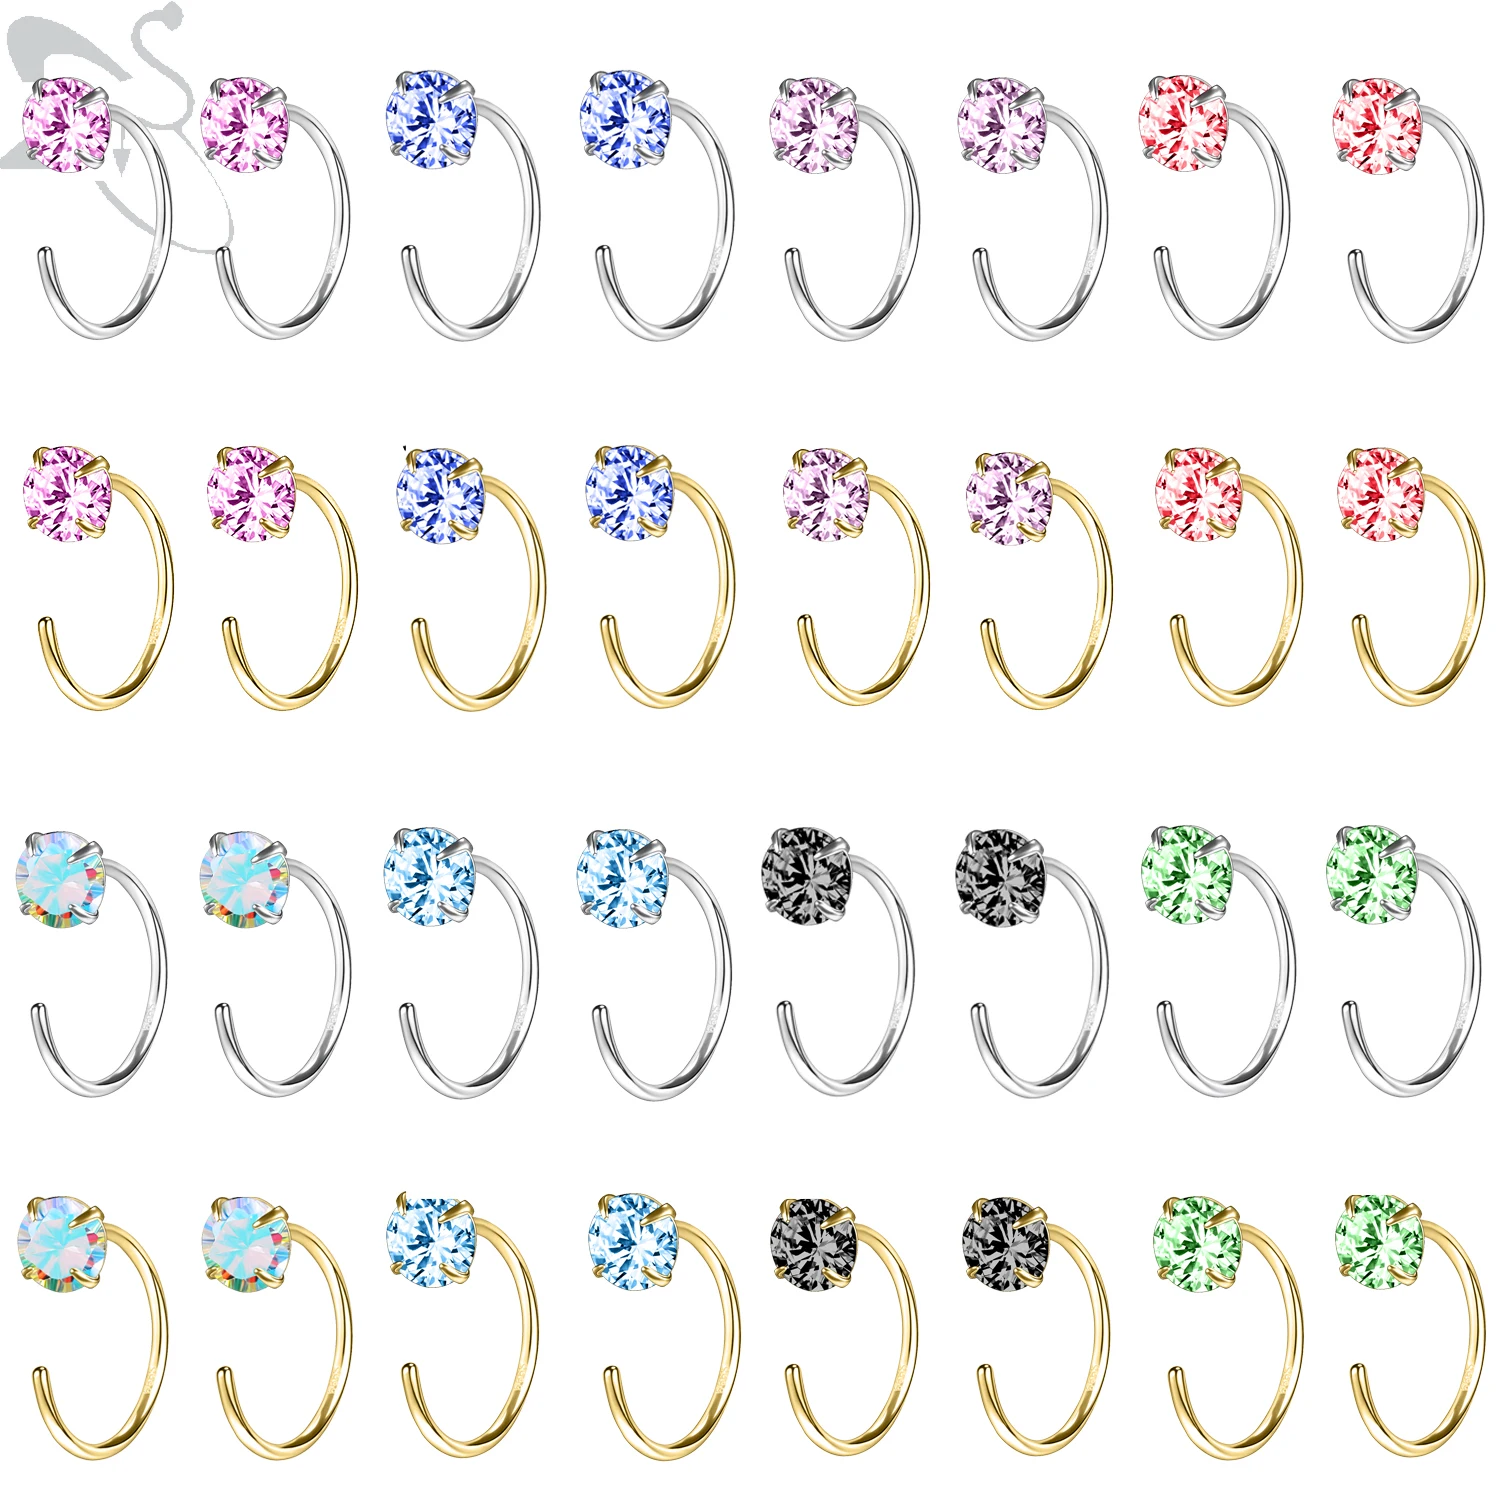 

ZS 1 Pair Tiny Gold Color Hoop Earrings 925 Sterling Silver Huggie Earring for Women CZ Crystal Cartilage Earring Helix Piercing